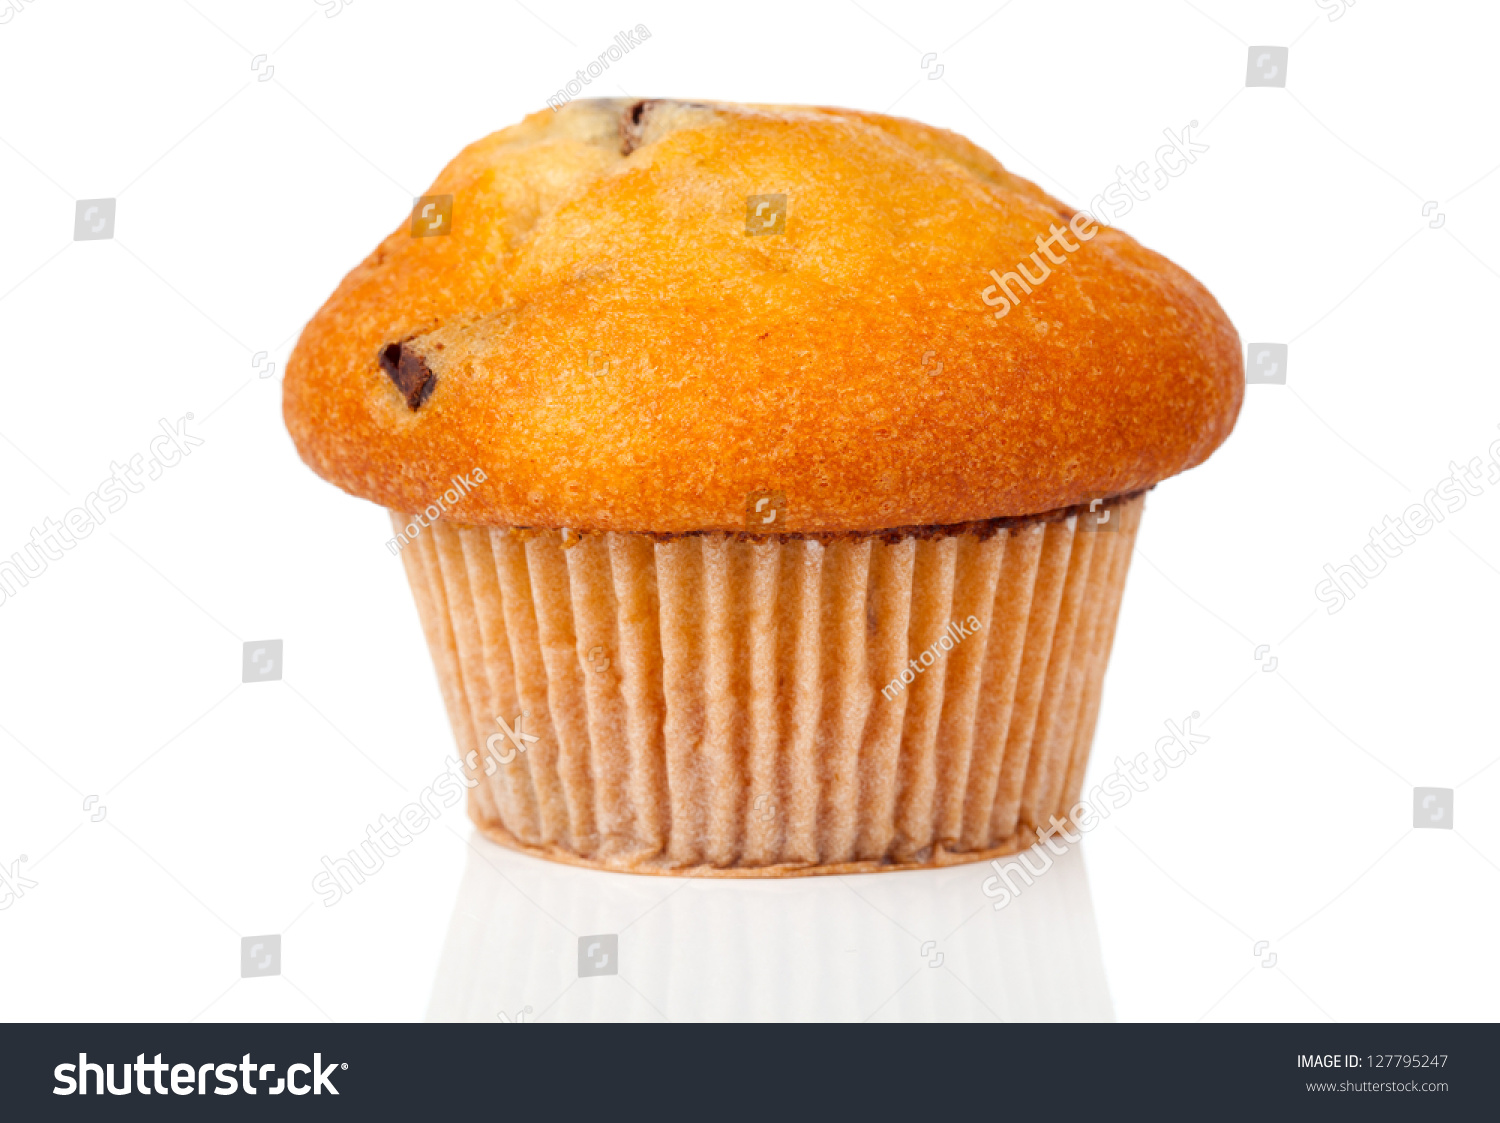 One Muffins, Isolated On White Background Stock Photo 127795247 ...